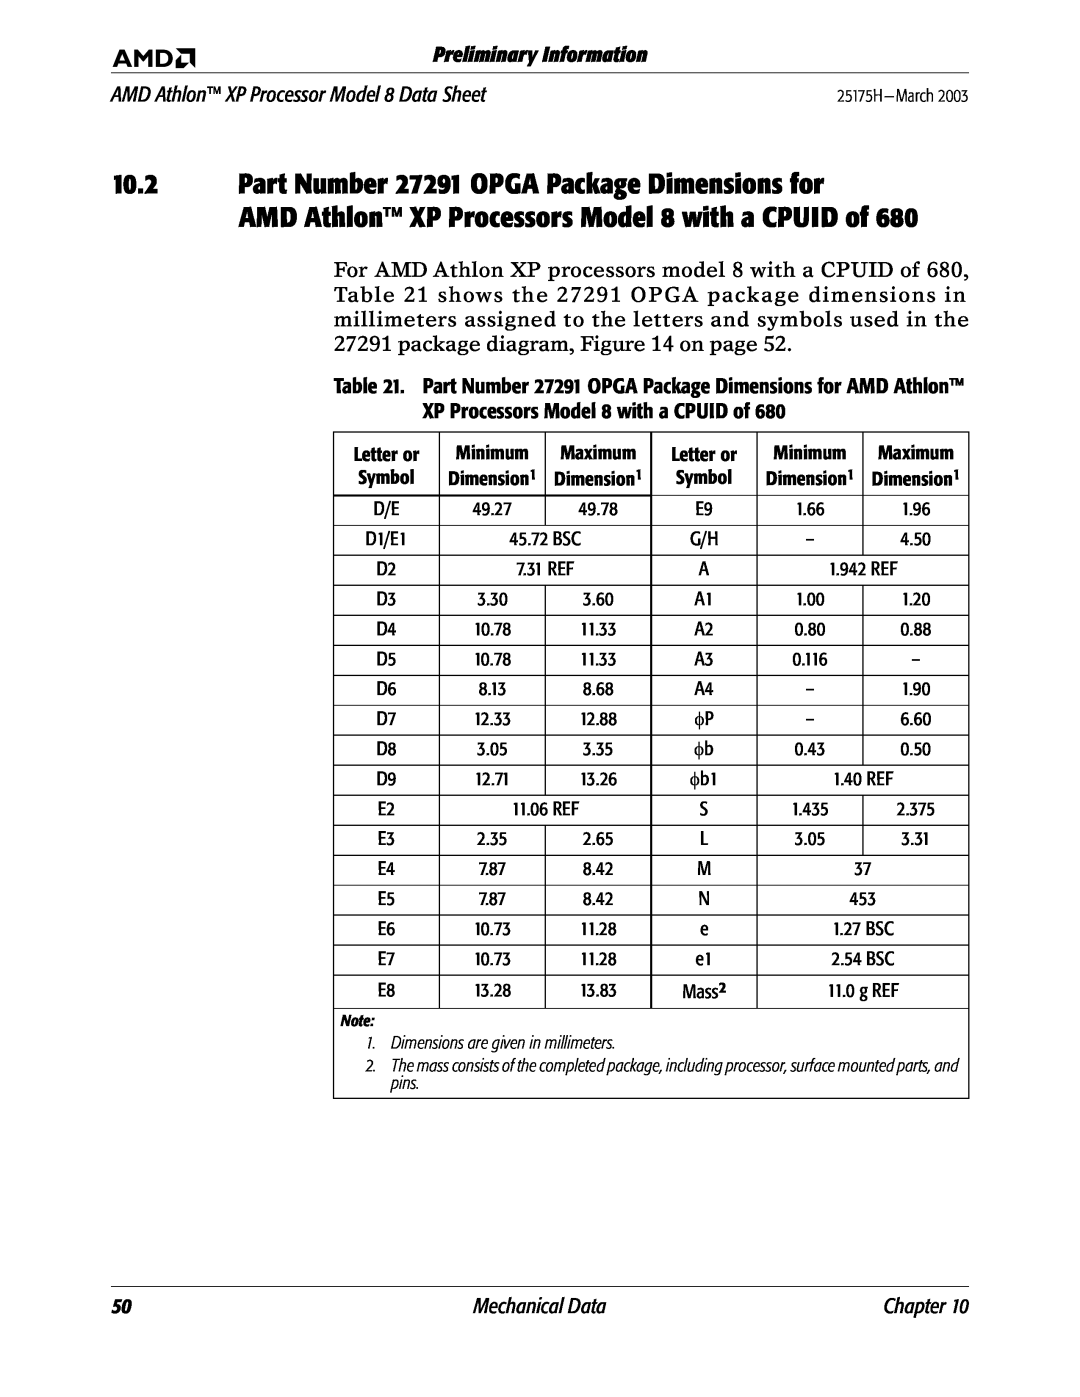 AMD Part Number 27291 OPGA Package Dimensions for, AMD Athlon XP Processors Model 8 with a CPUID of, Mechanical Data 